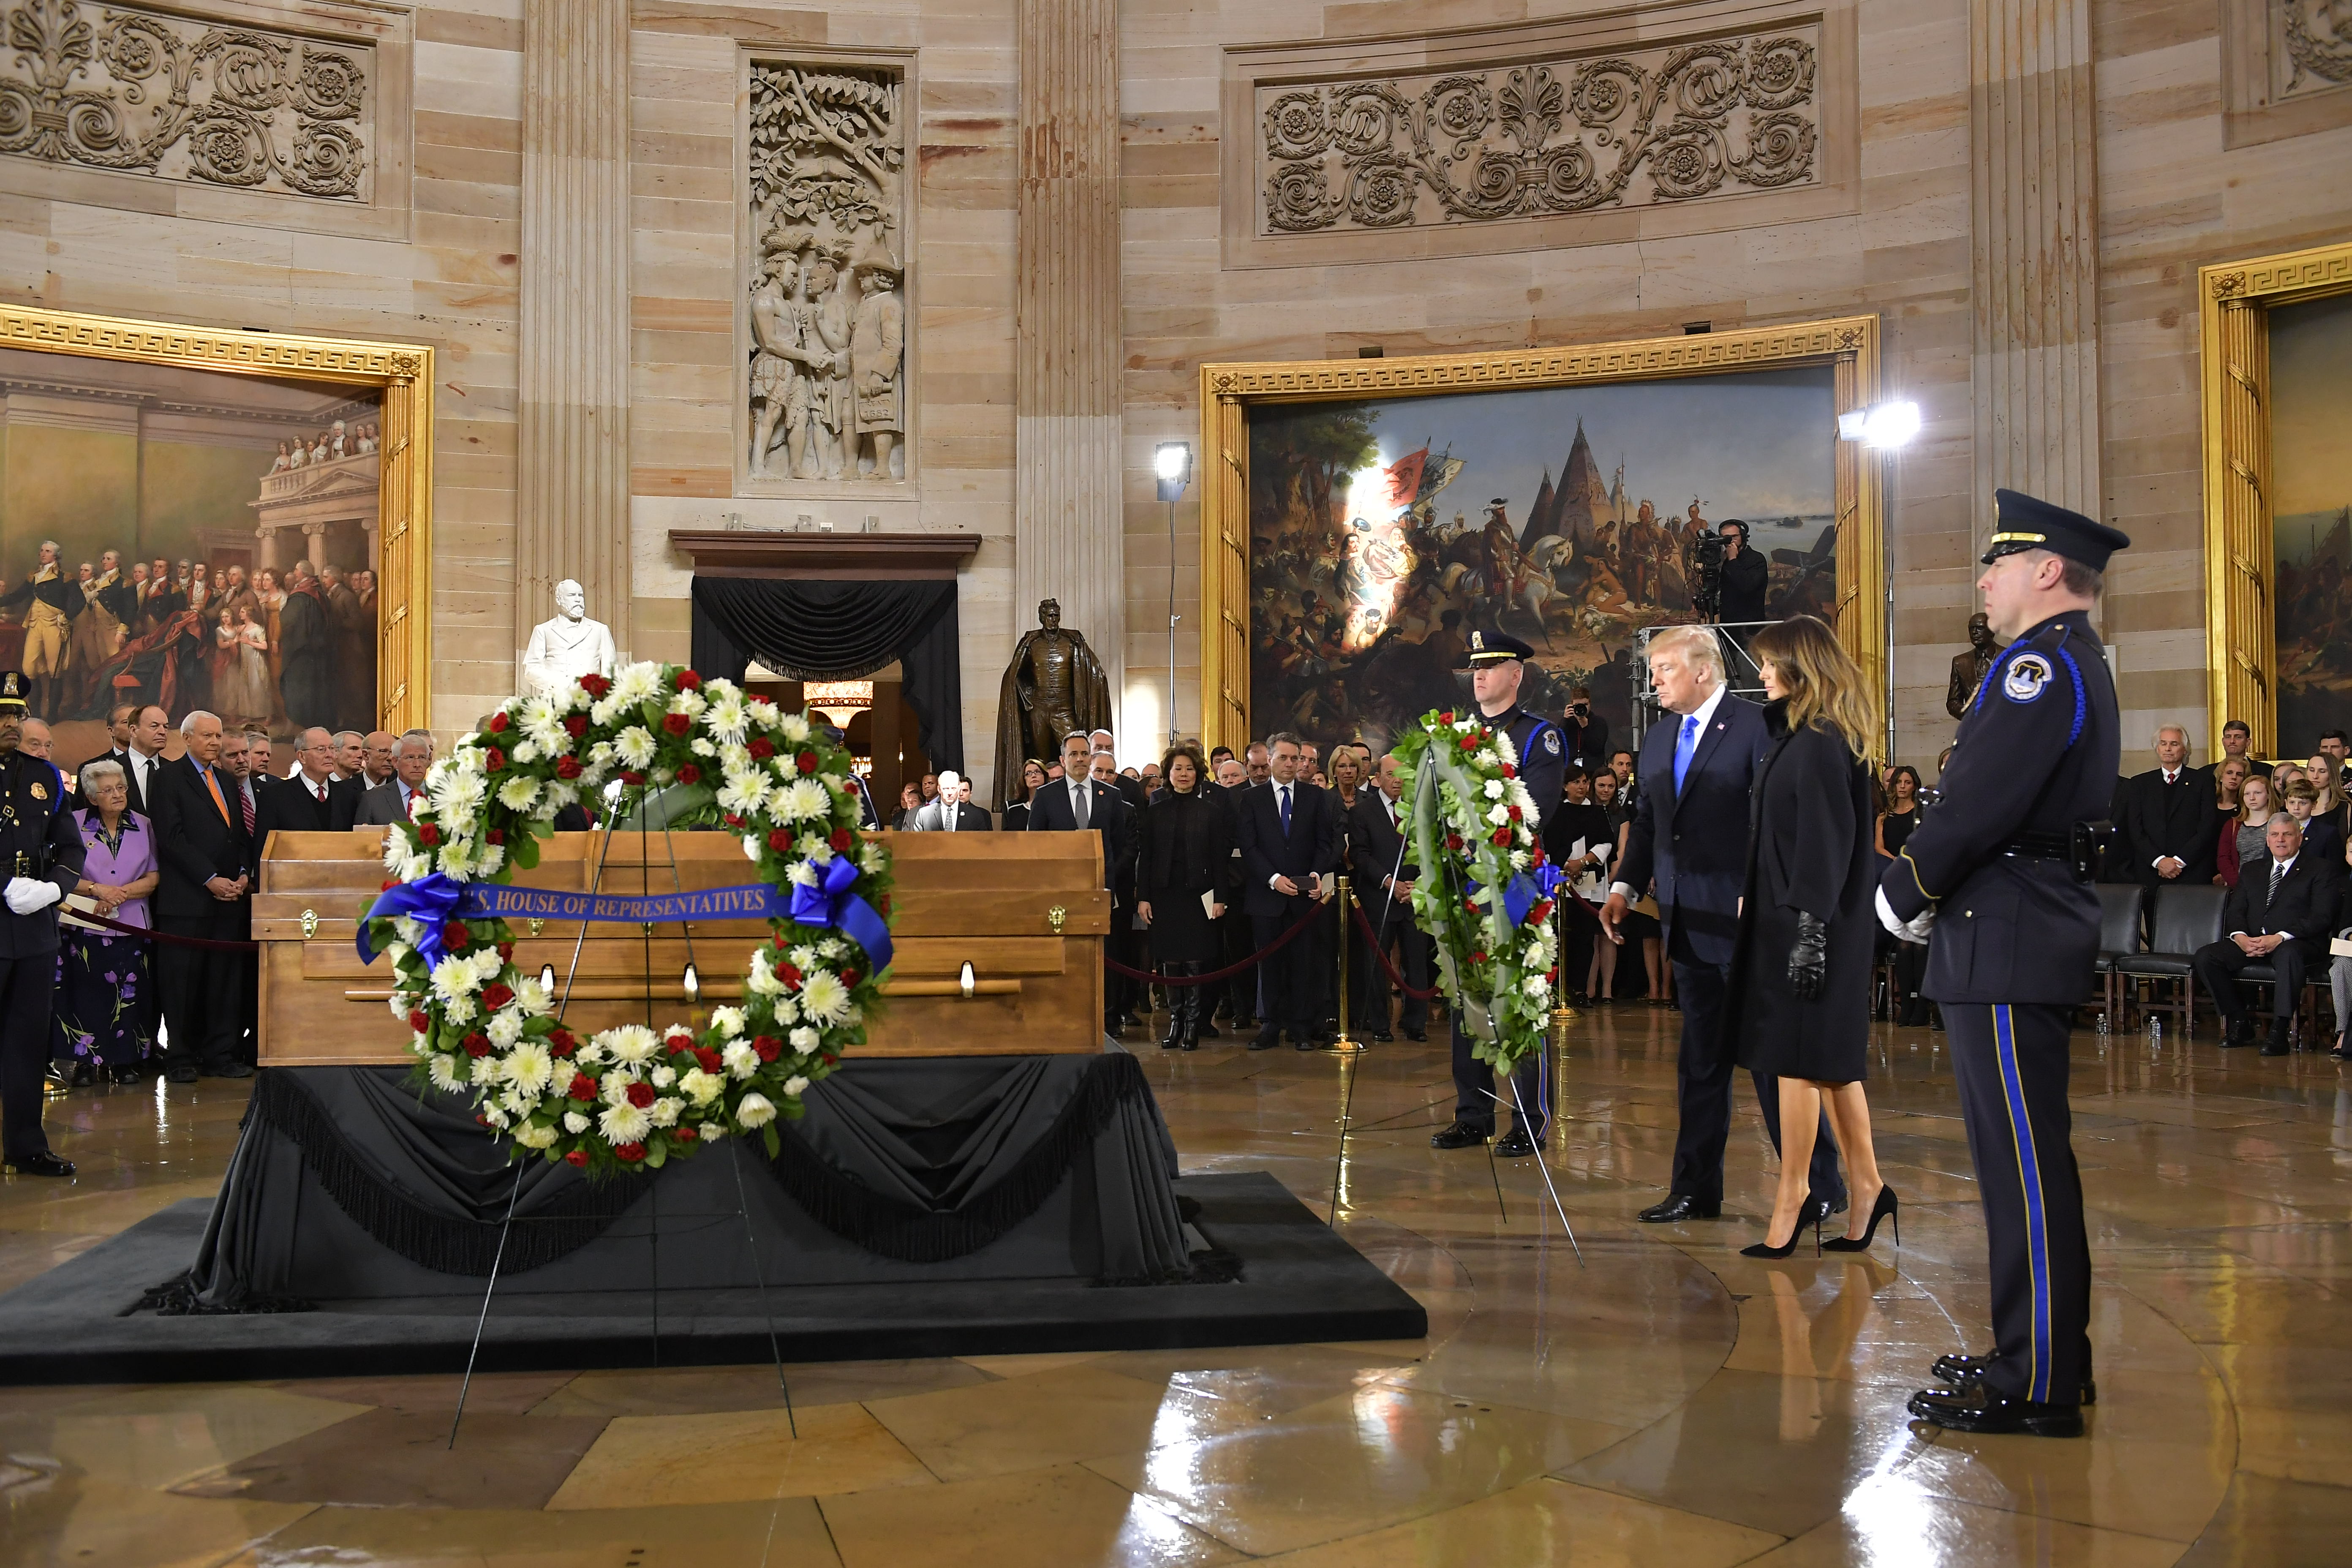 US President Donald Trump and First Lady Melania Trump pay their respects at Rev. Billy Graham's casket in the Rotunda of the U.S.Capitol in Washington, Wednesday, Feb. 28, 2018. / AFP PHOTO / Mandel NGAN (Photo credit should read MANDEL NGAN/AFP/Getty Images)